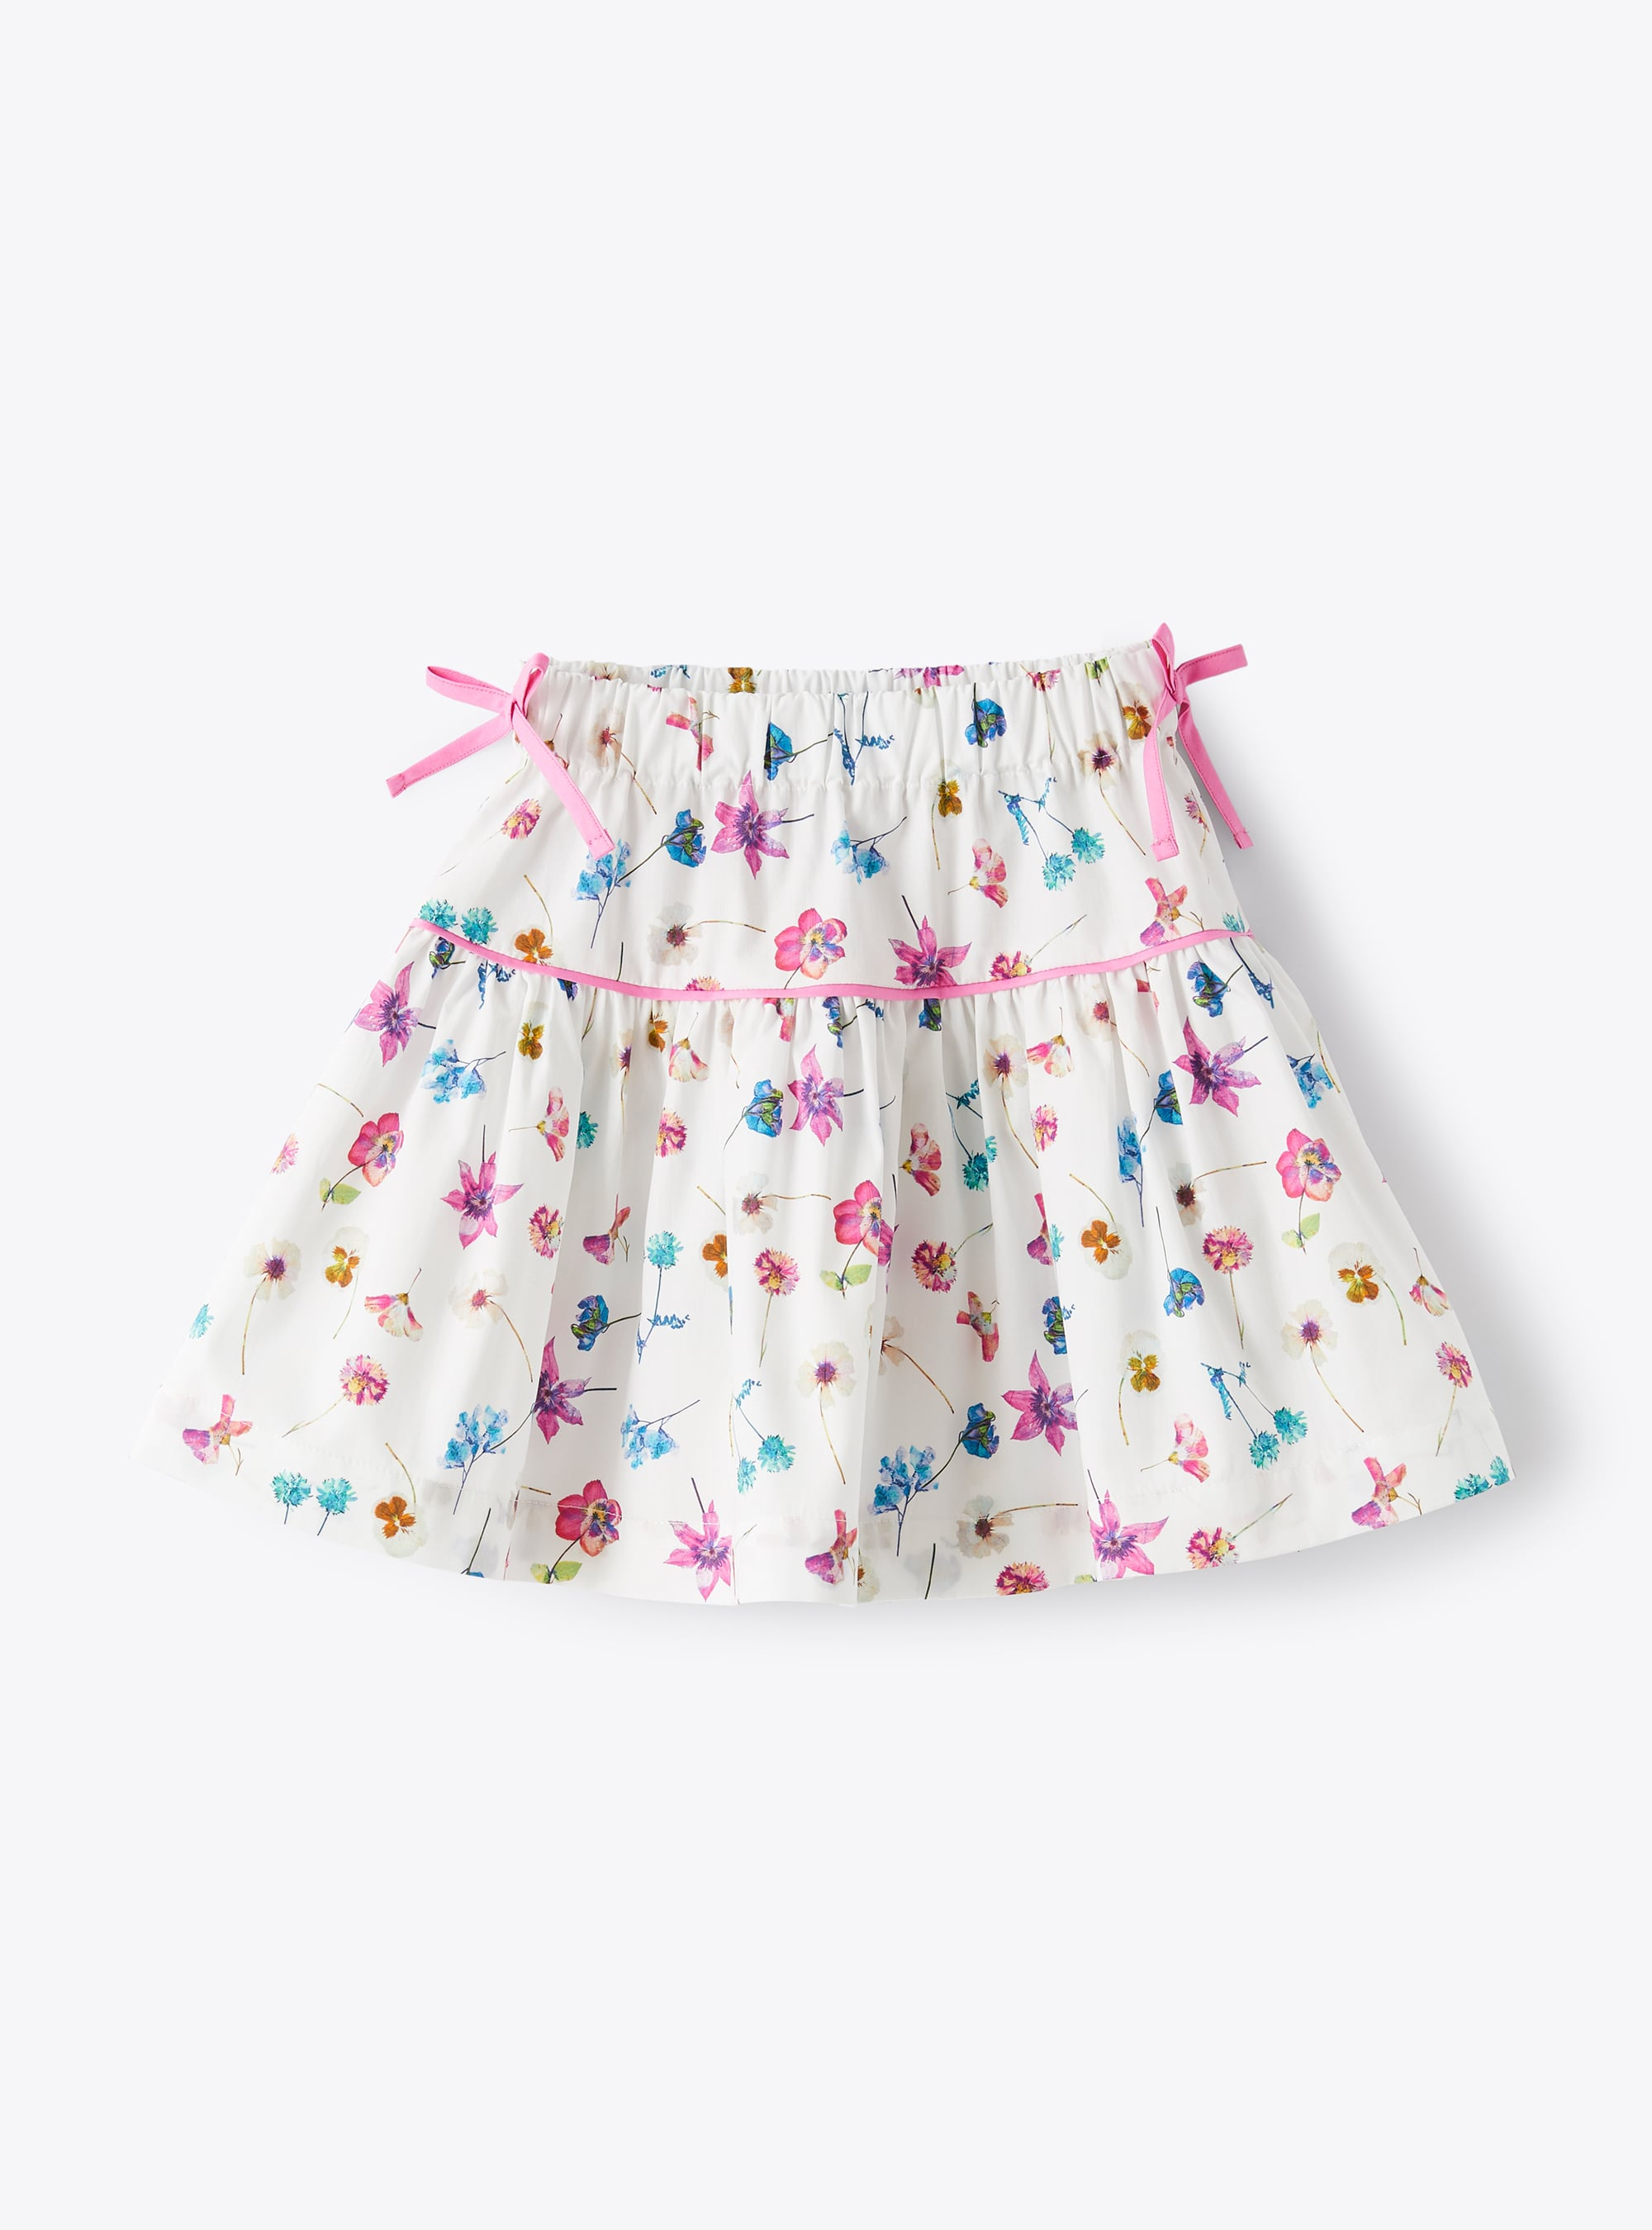 Cotton skirt in an exclusive floral print design - White | Il Gufo